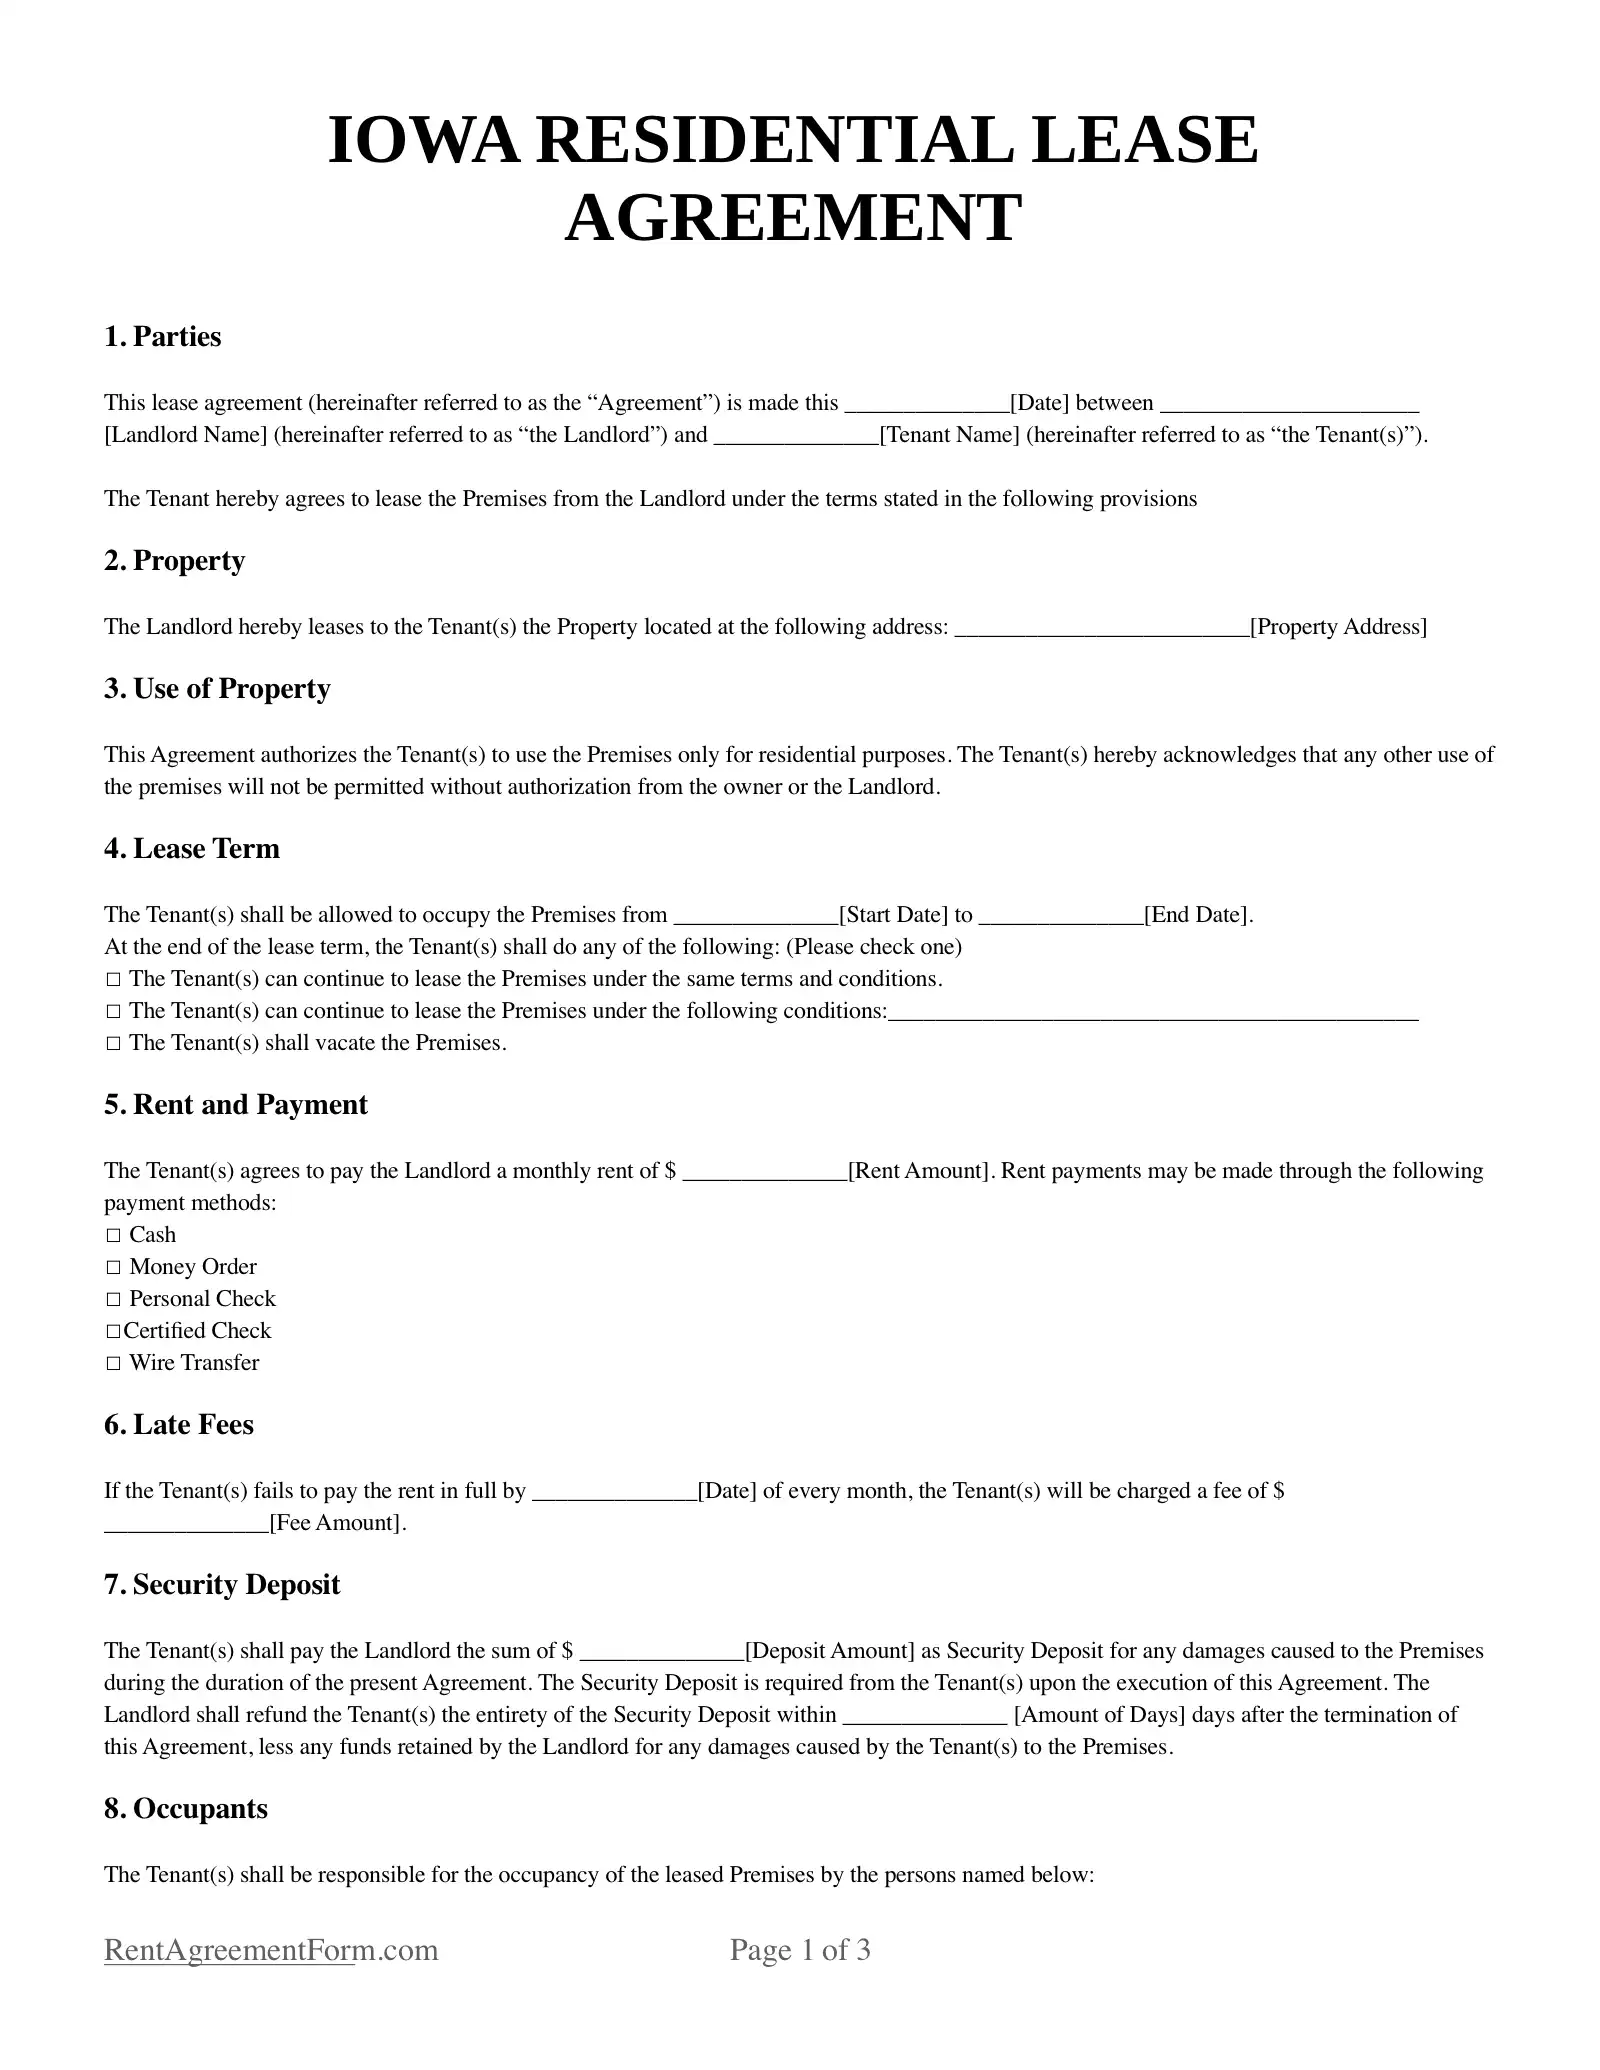 Iowa Residential Lease Agreement Sample